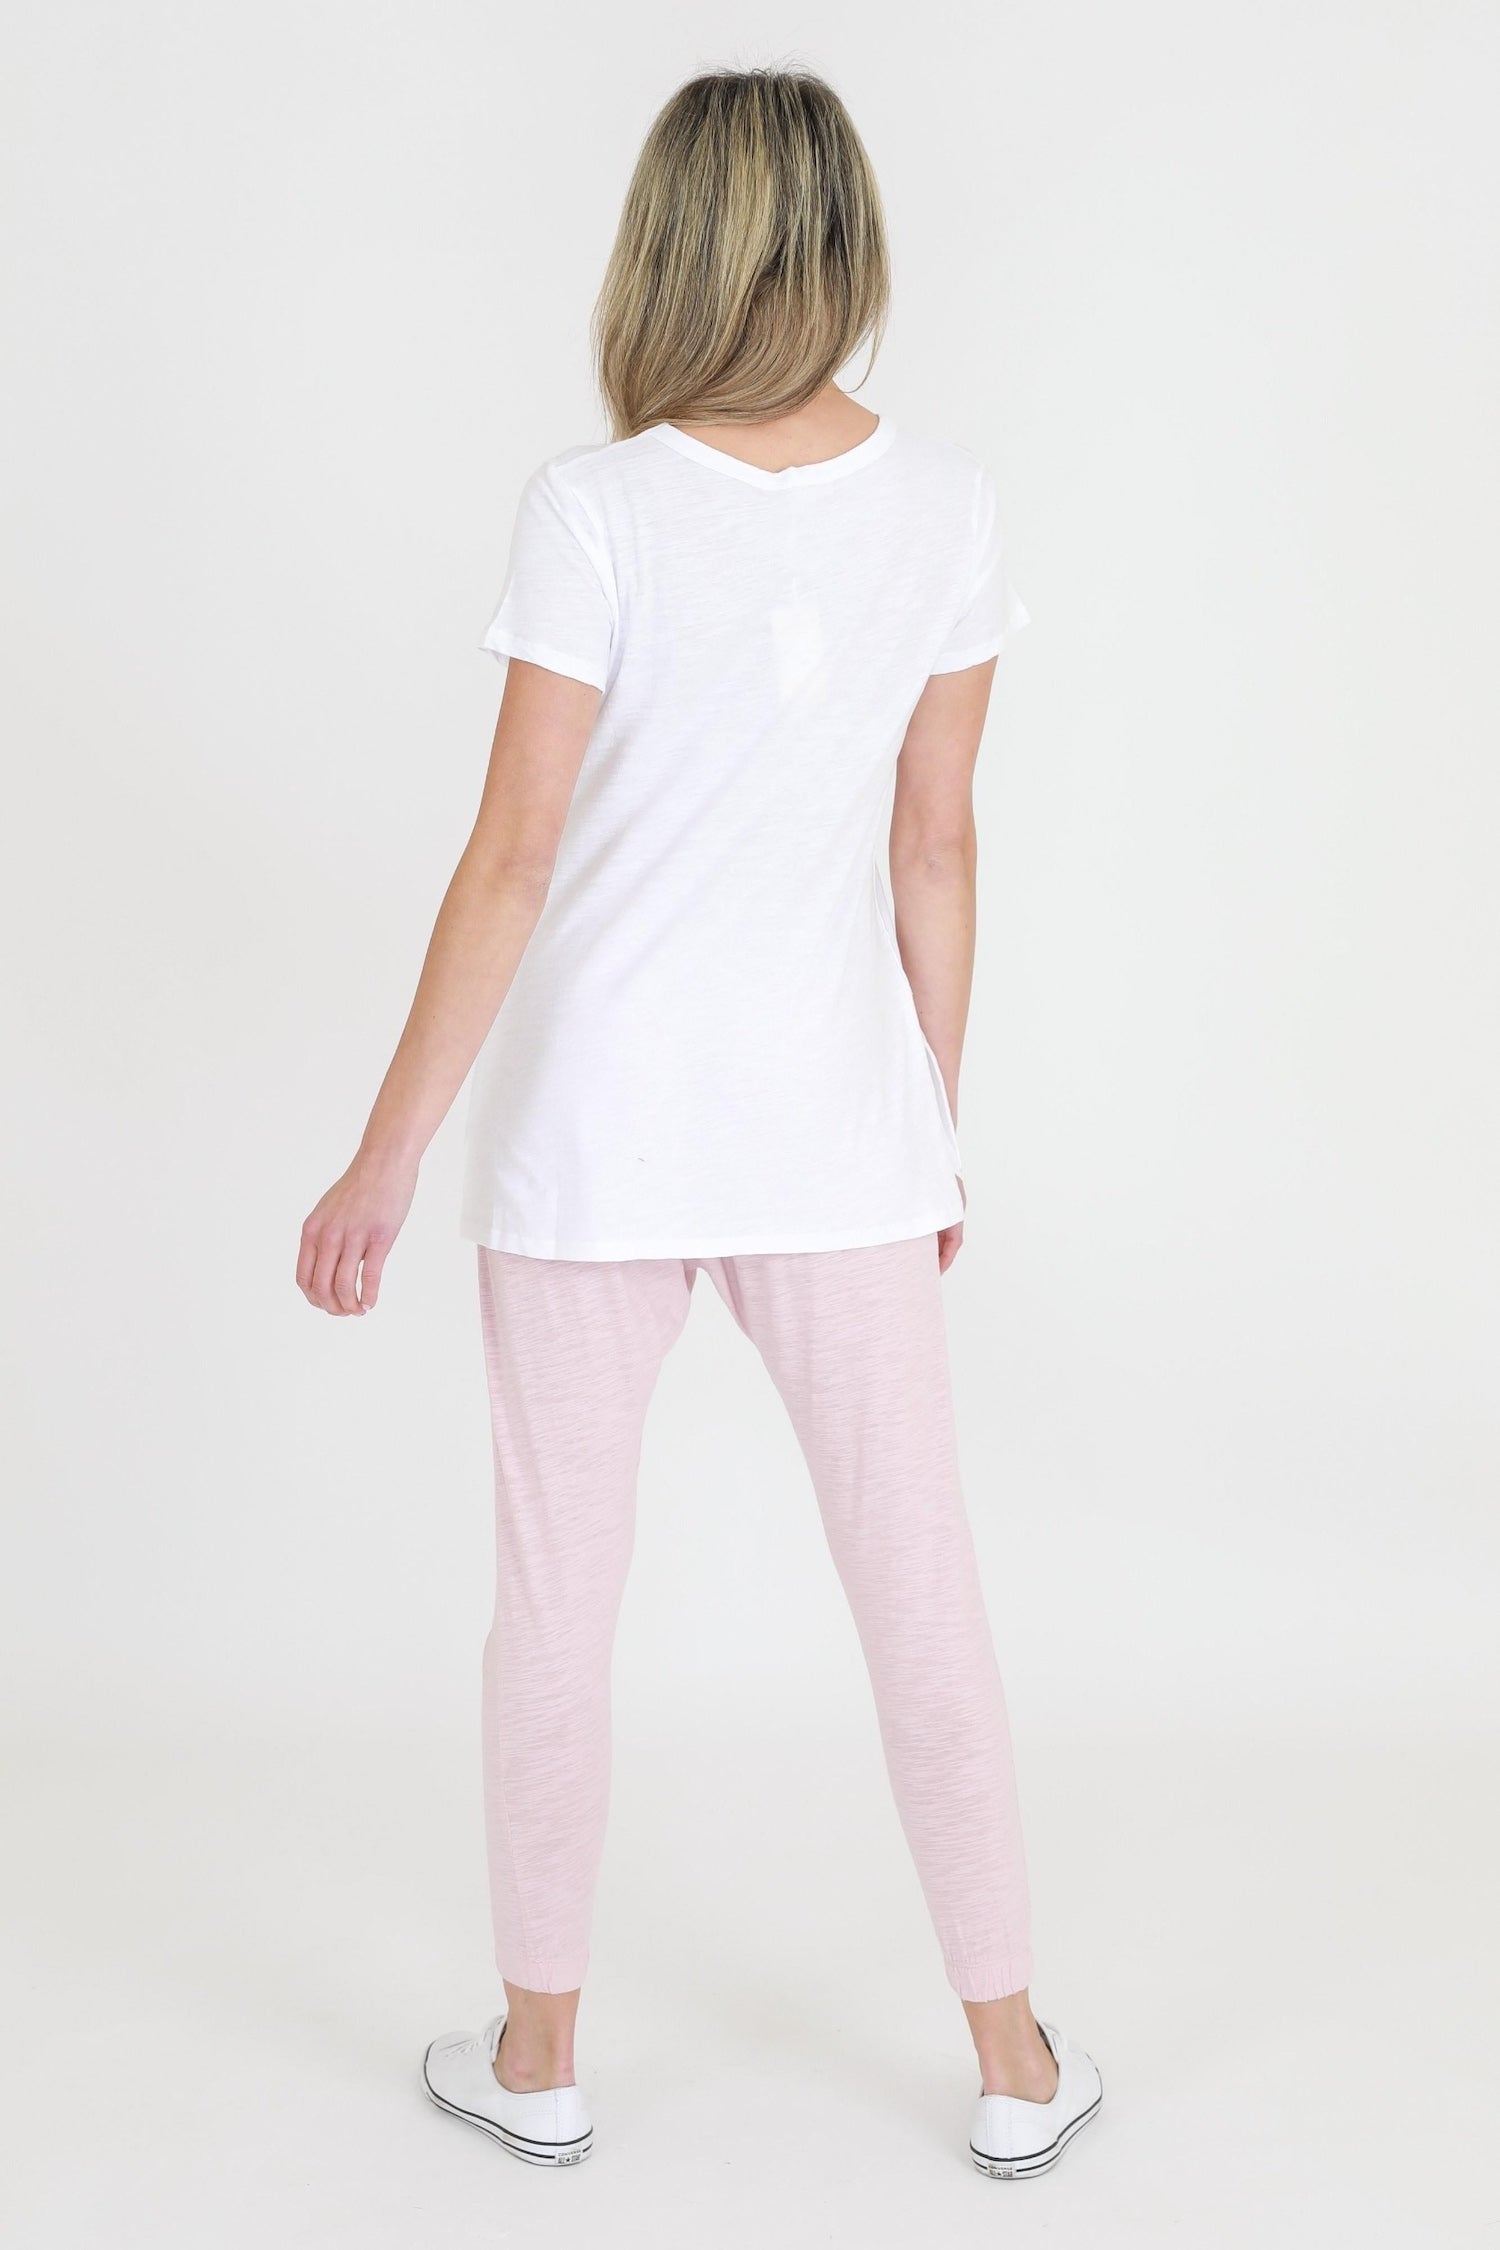 Women's White Tee With Side Slits